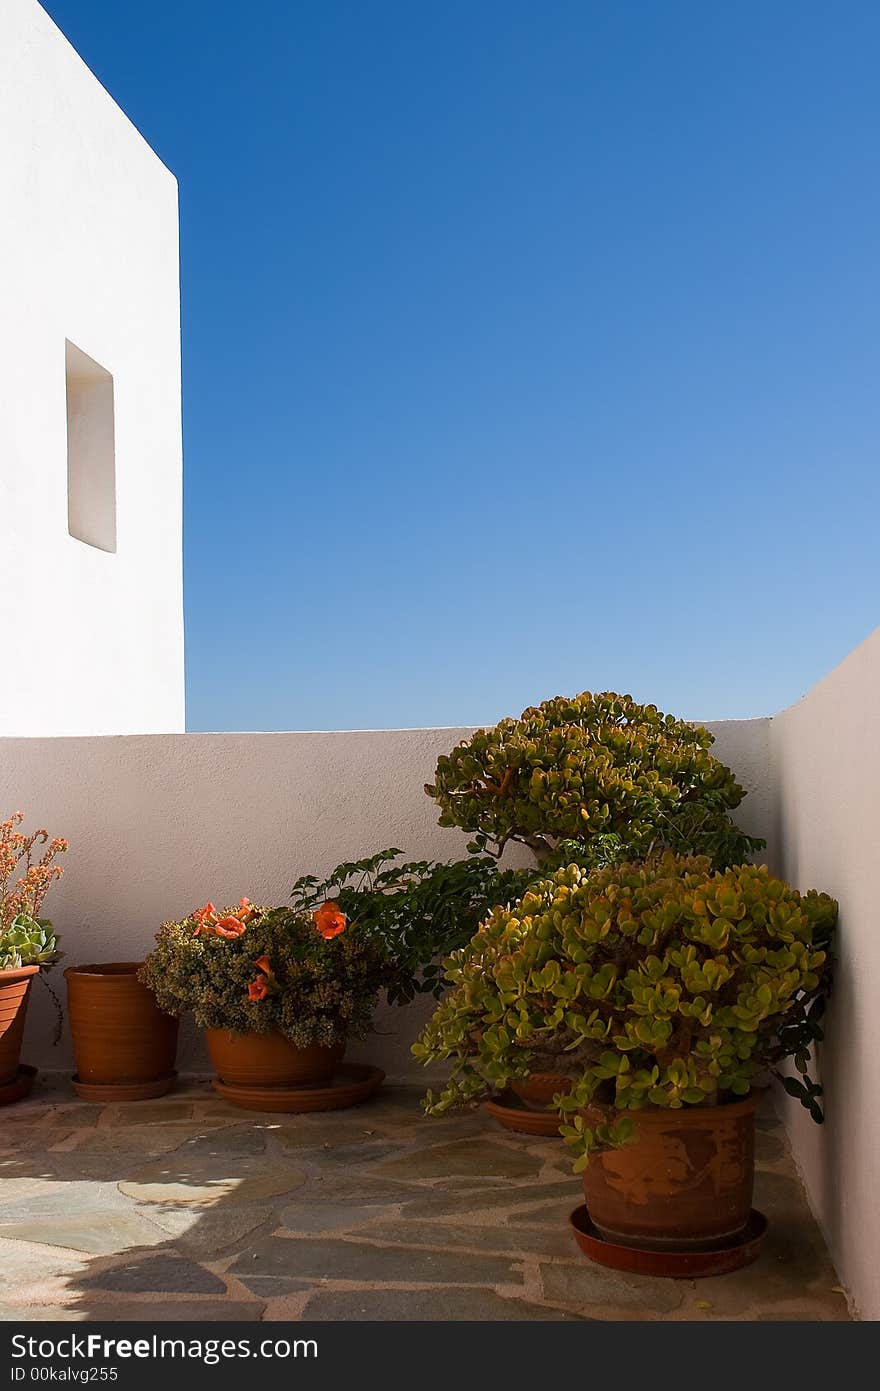 Miscellaneous flower pots standing on a porch. White stucco wall highlighting blue skies is on a background. Miscellaneous flower pots standing on a porch. White stucco wall highlighting blue skies is on a background.